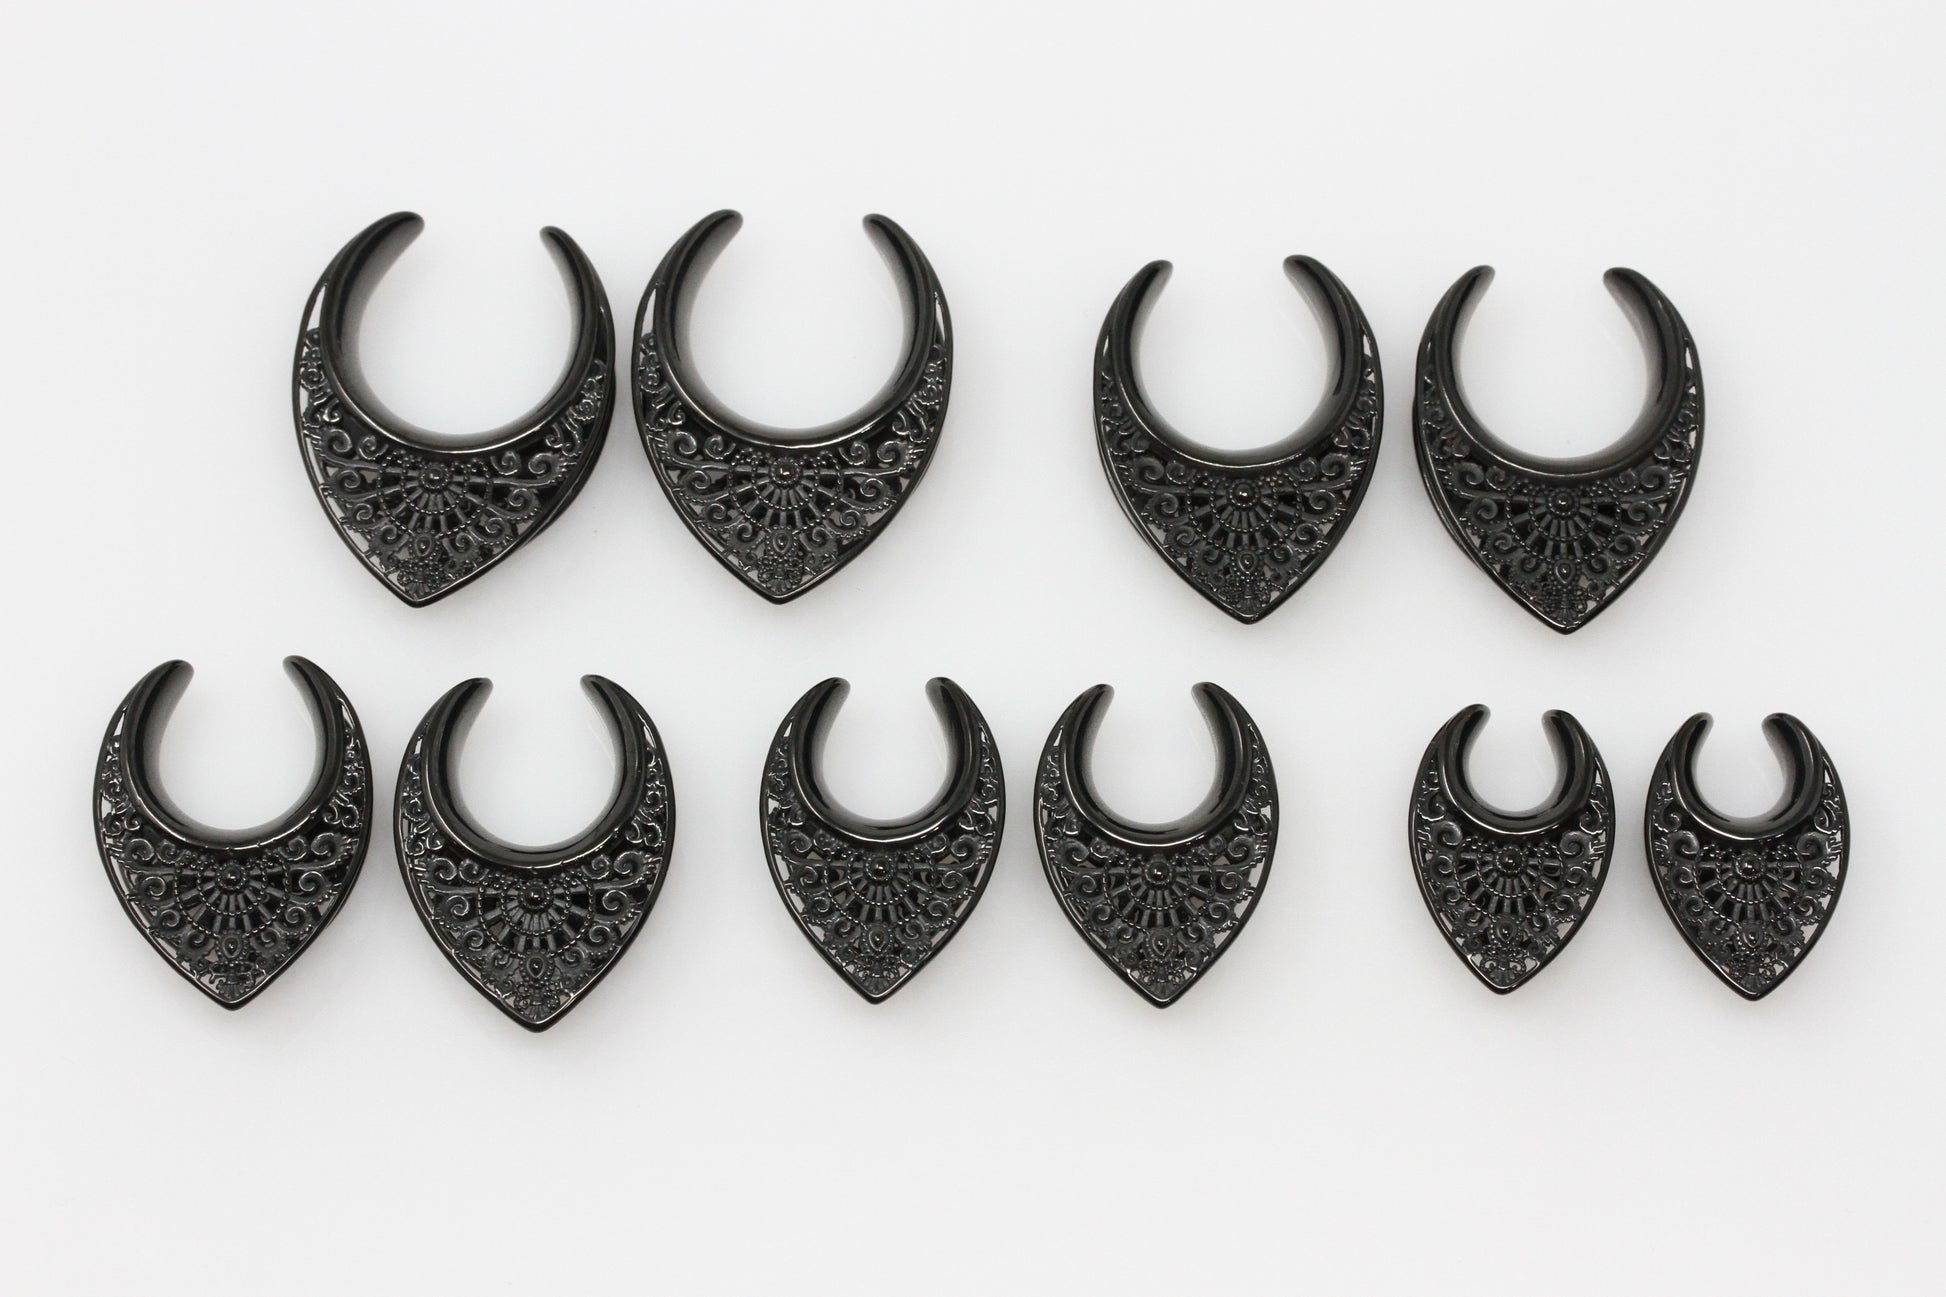 Black stainless steel saddles for stretched ears